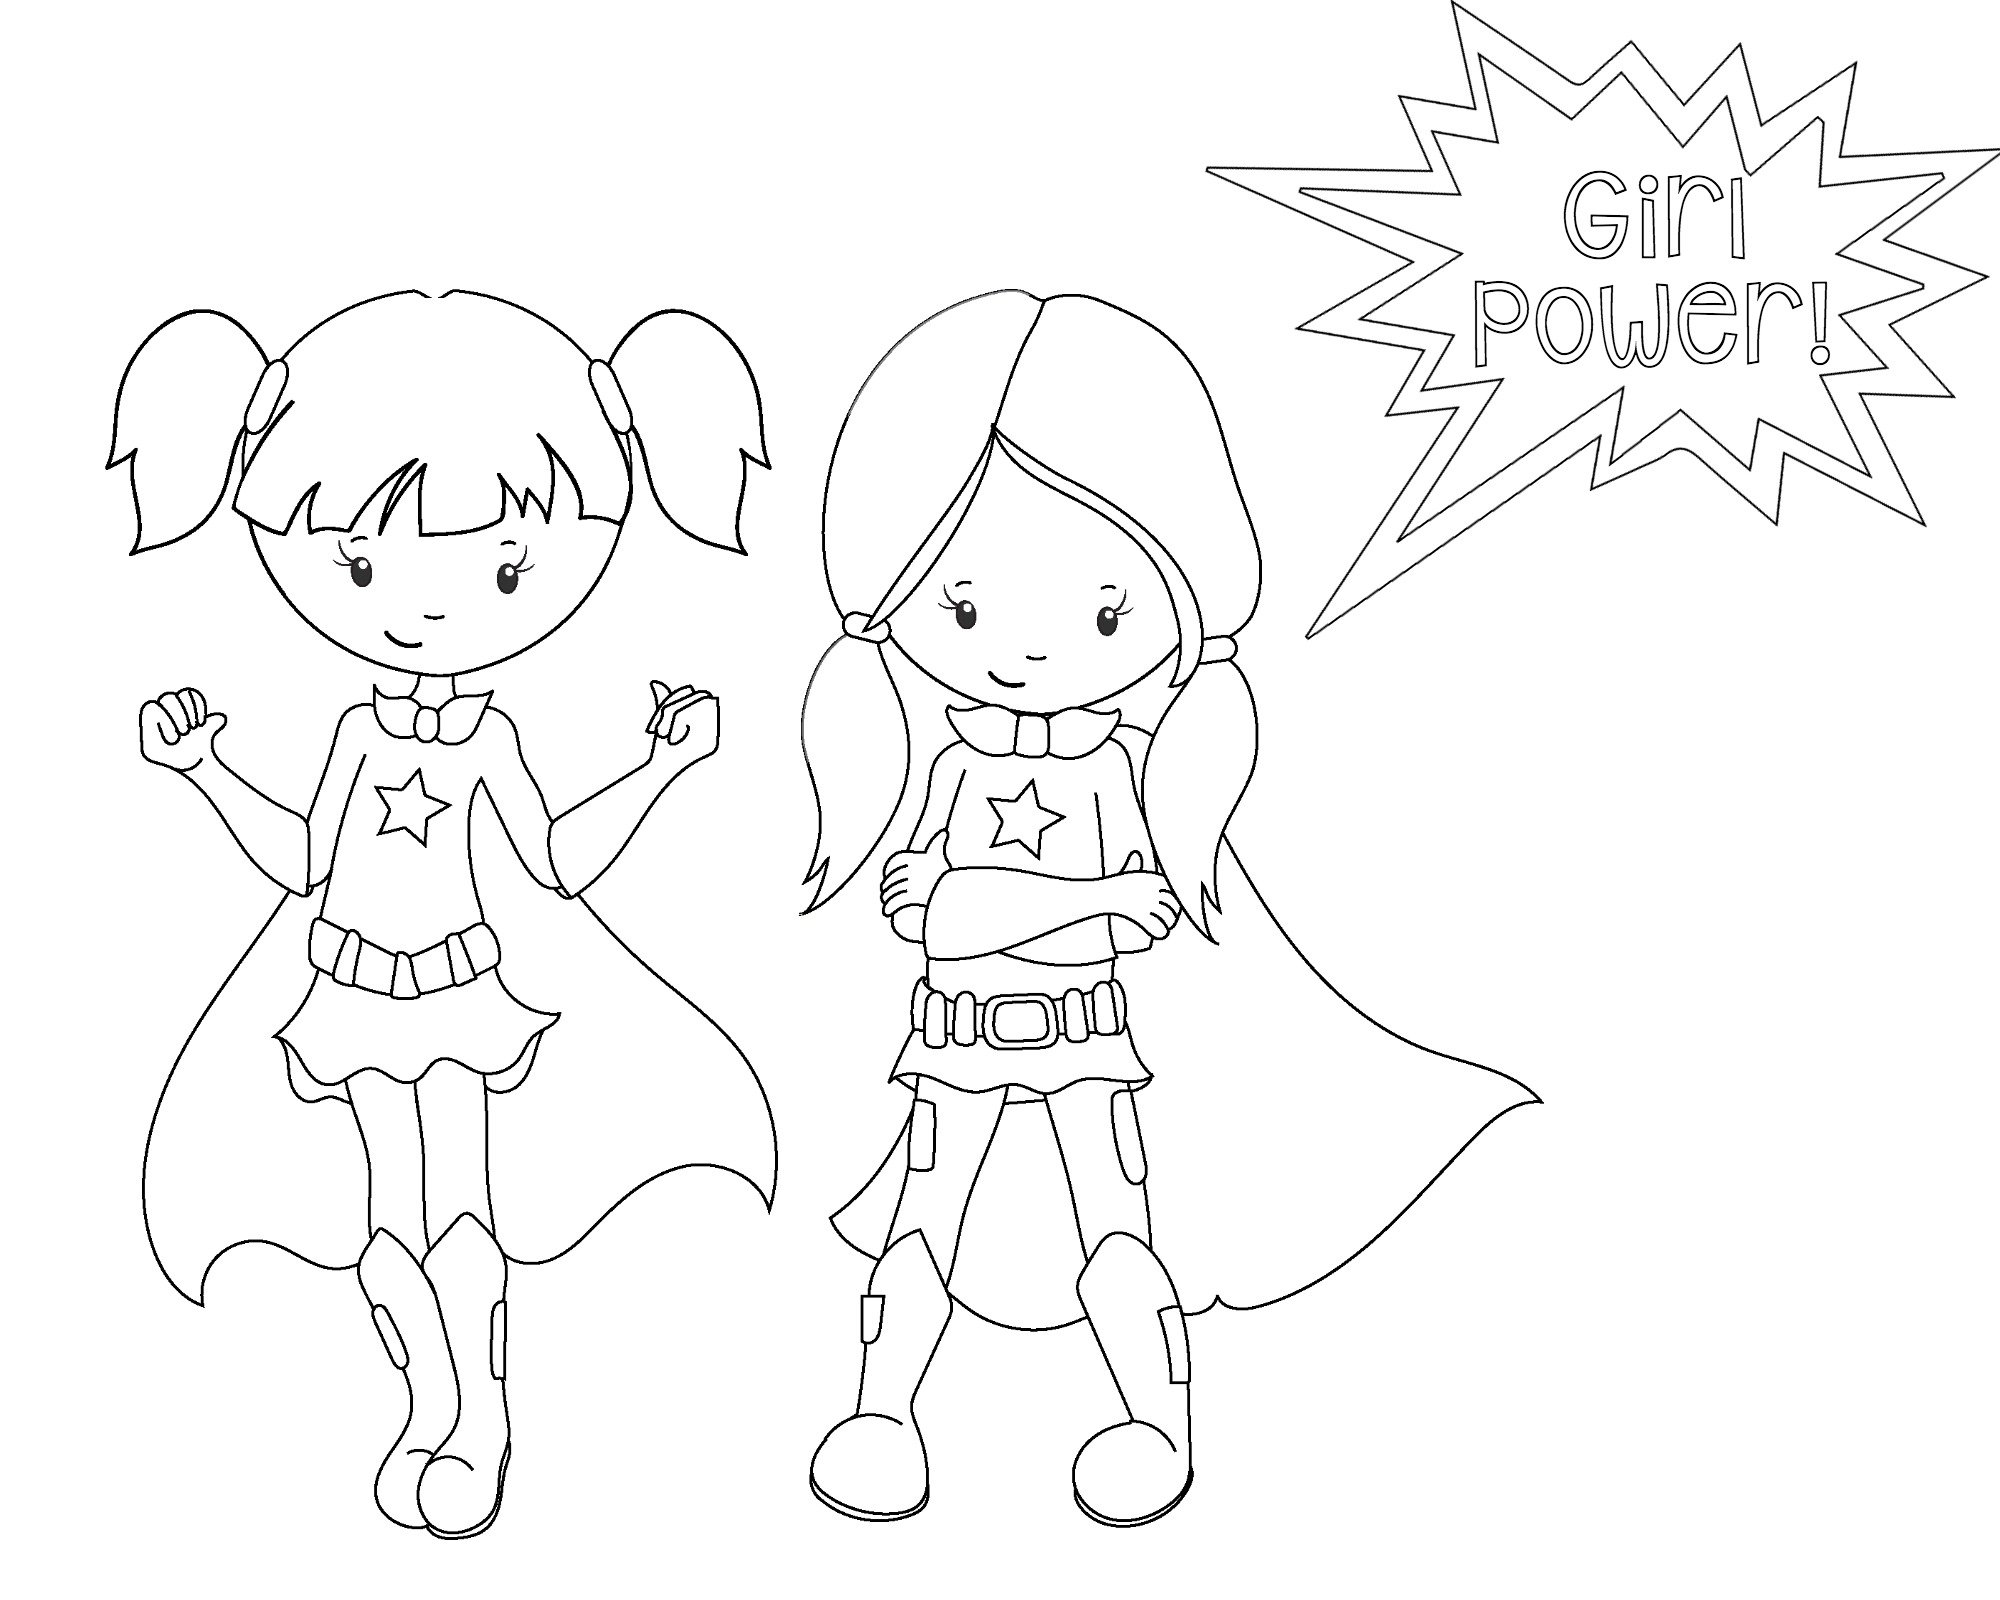 Superhero Coloring Pages - Crazy Little Projects